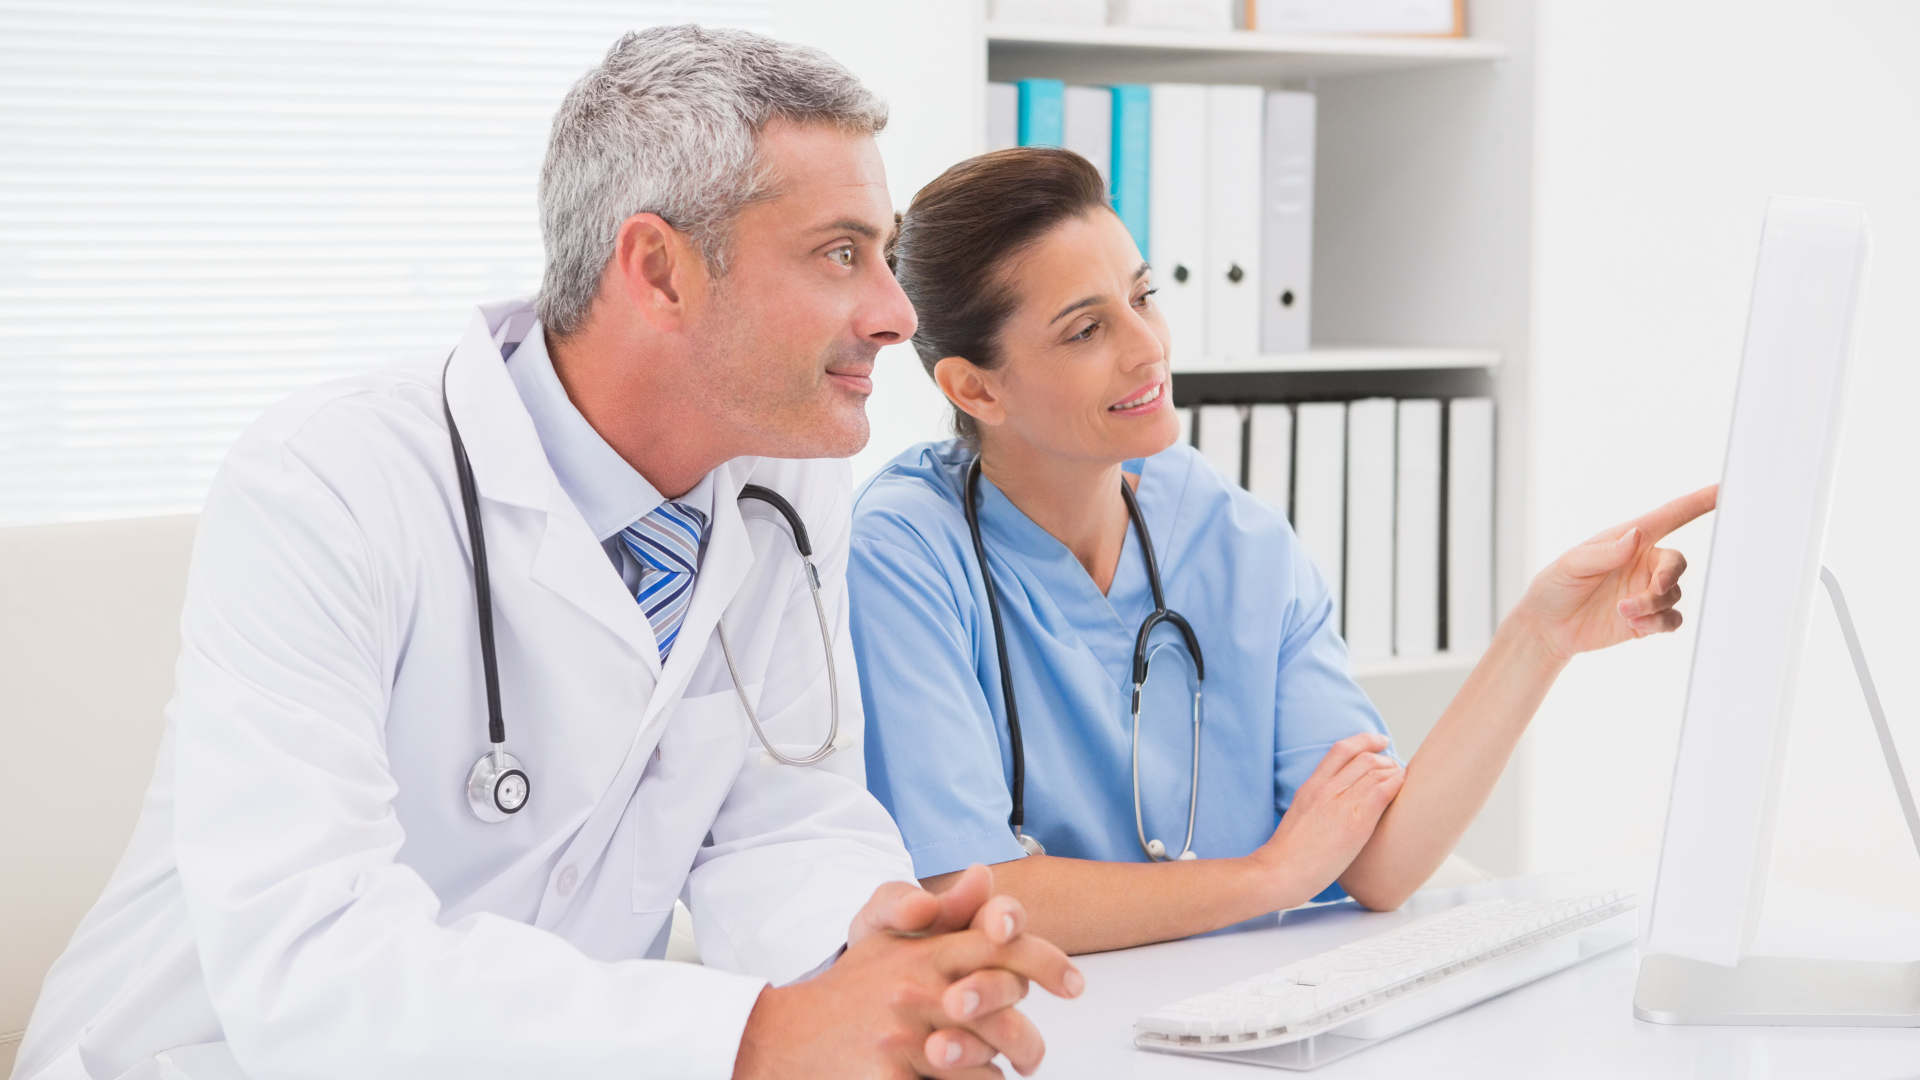 Looking For the Best Medical Office Software For Ophthalmology?